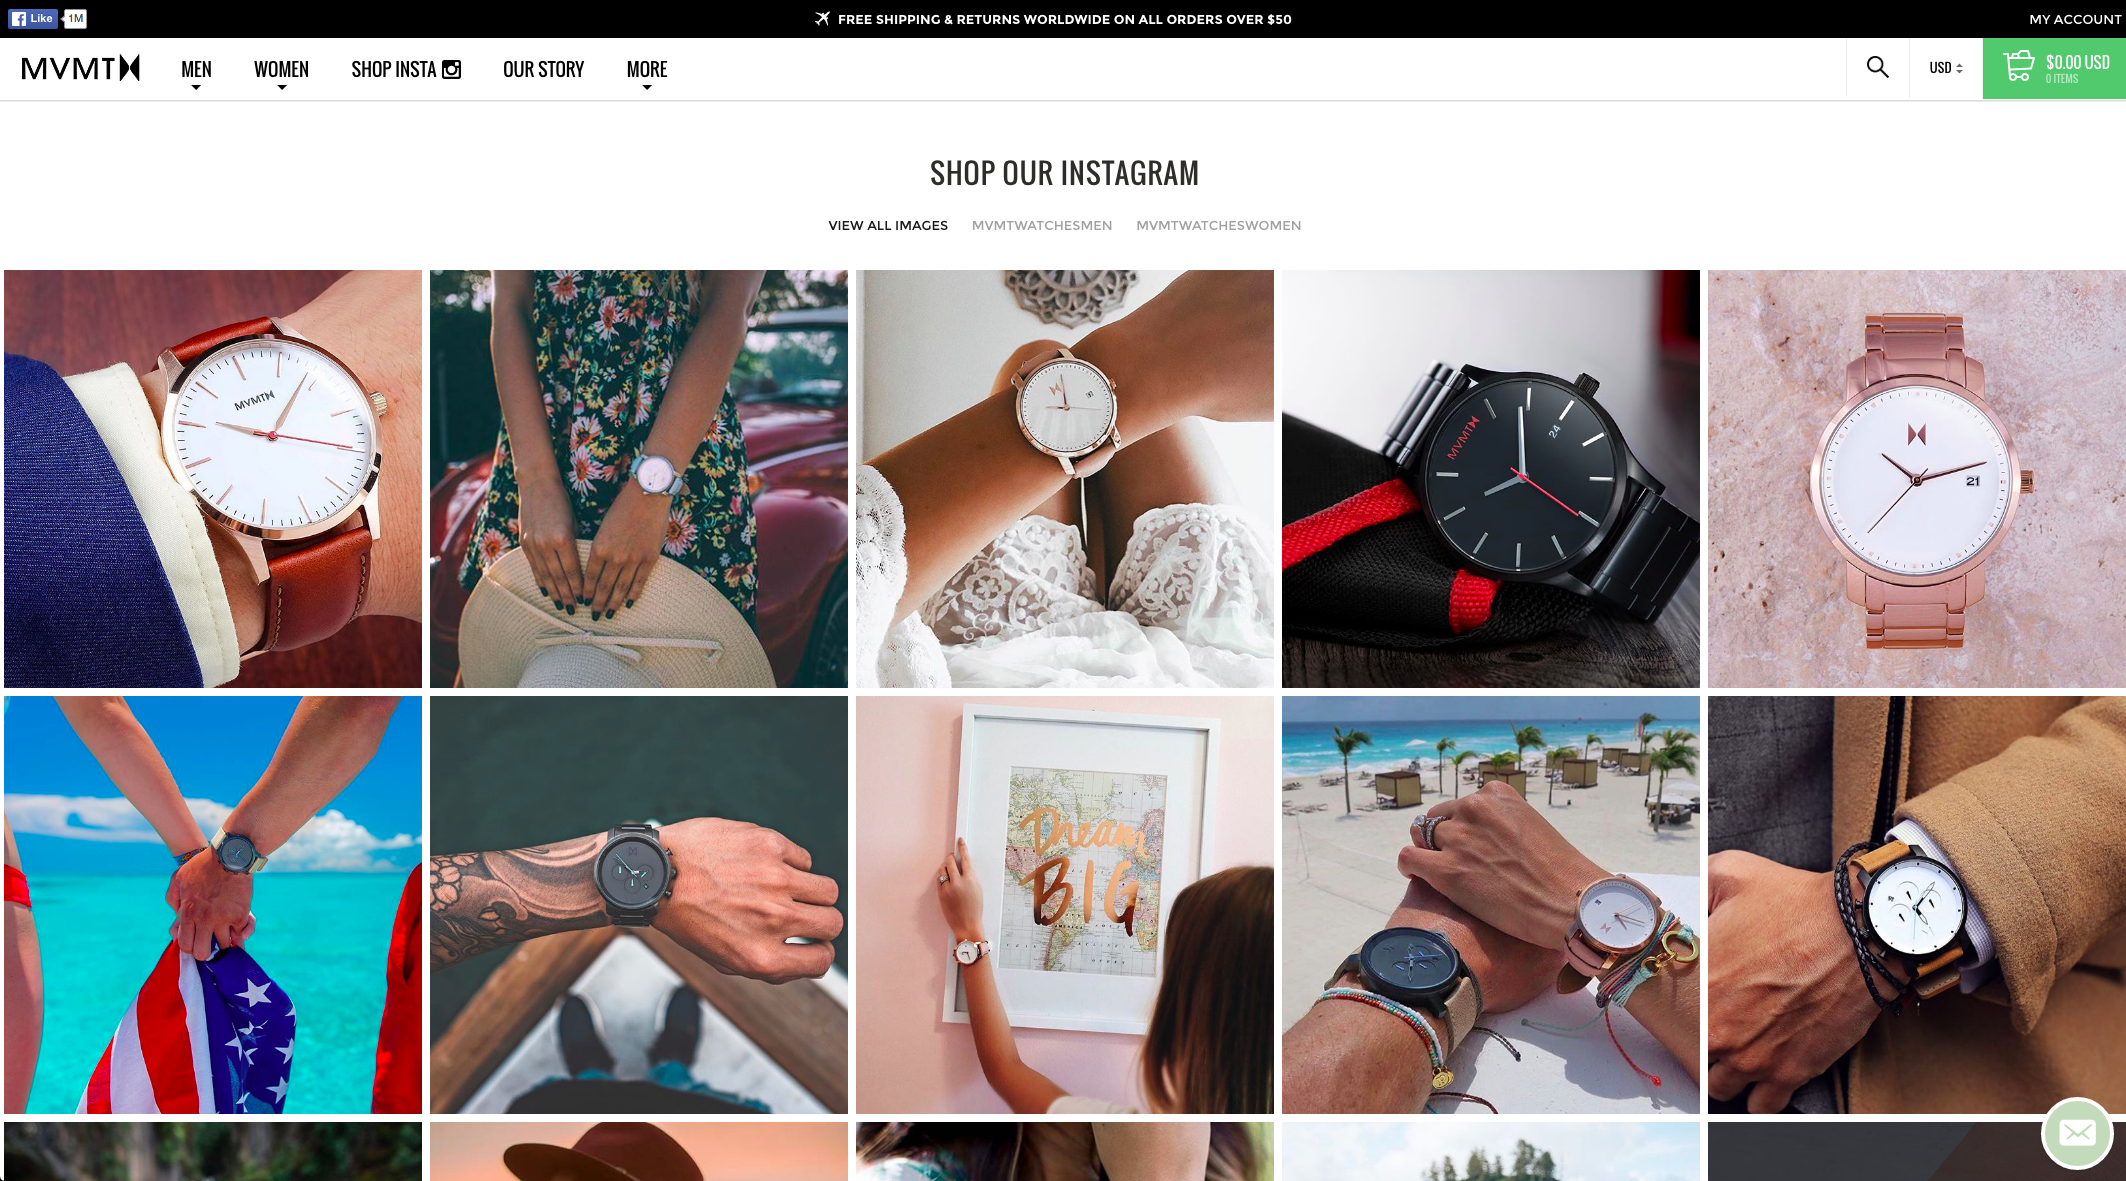 Image of Instagram feed with shopping feature